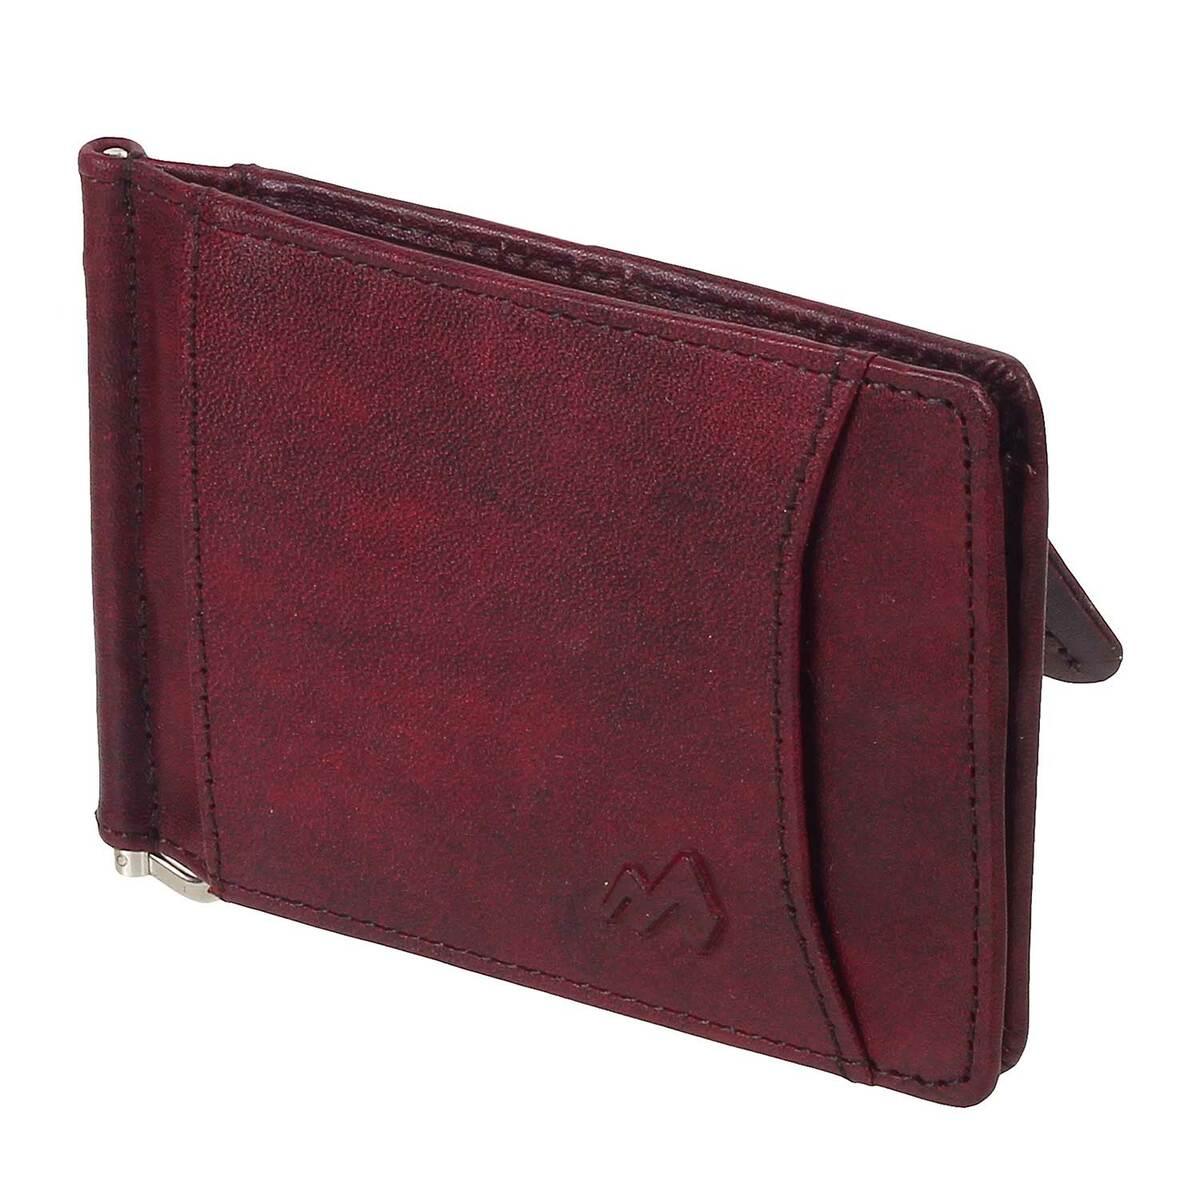 The Money Bag|men's Genuine Leather Wallet With Hasp & Coin Pocket -  Cowhide Clutch